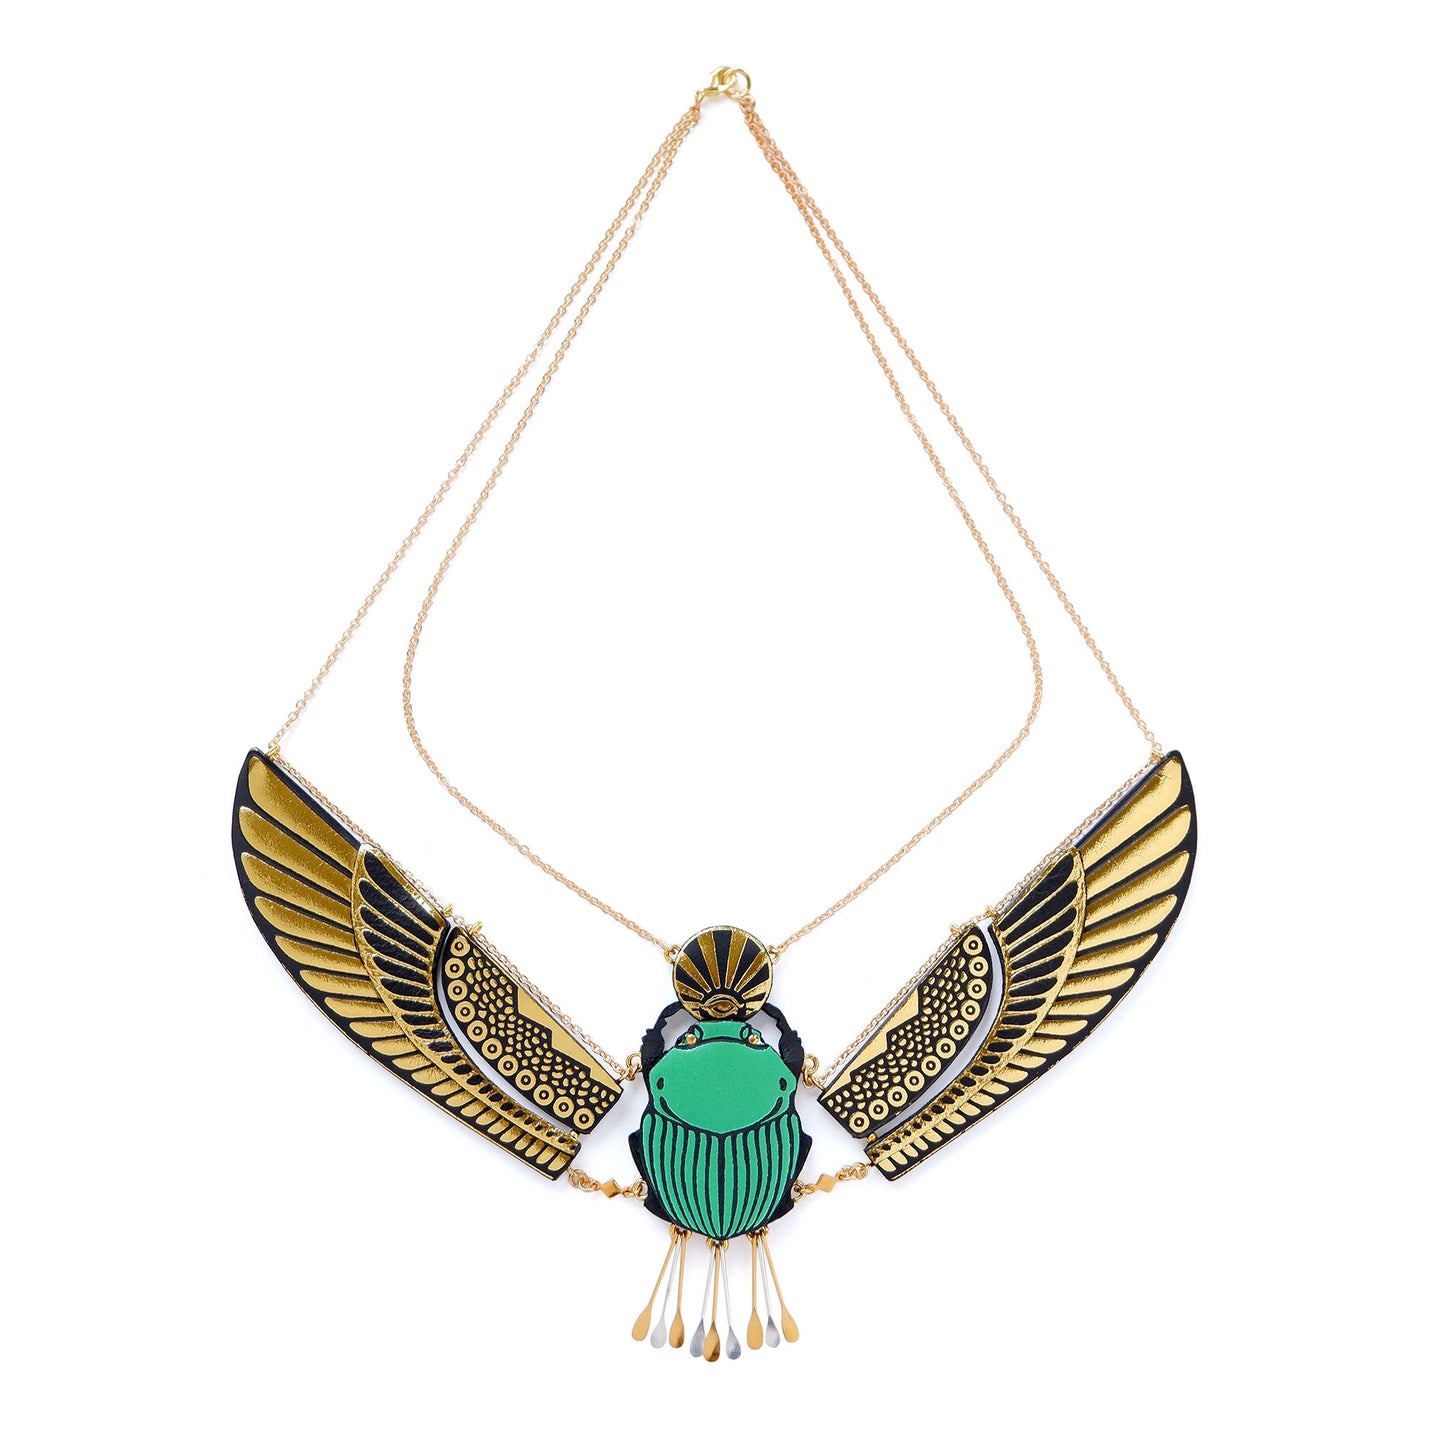 jade green sacred scarab necklace with gold wings. Made from printed leather, on fine gold chain